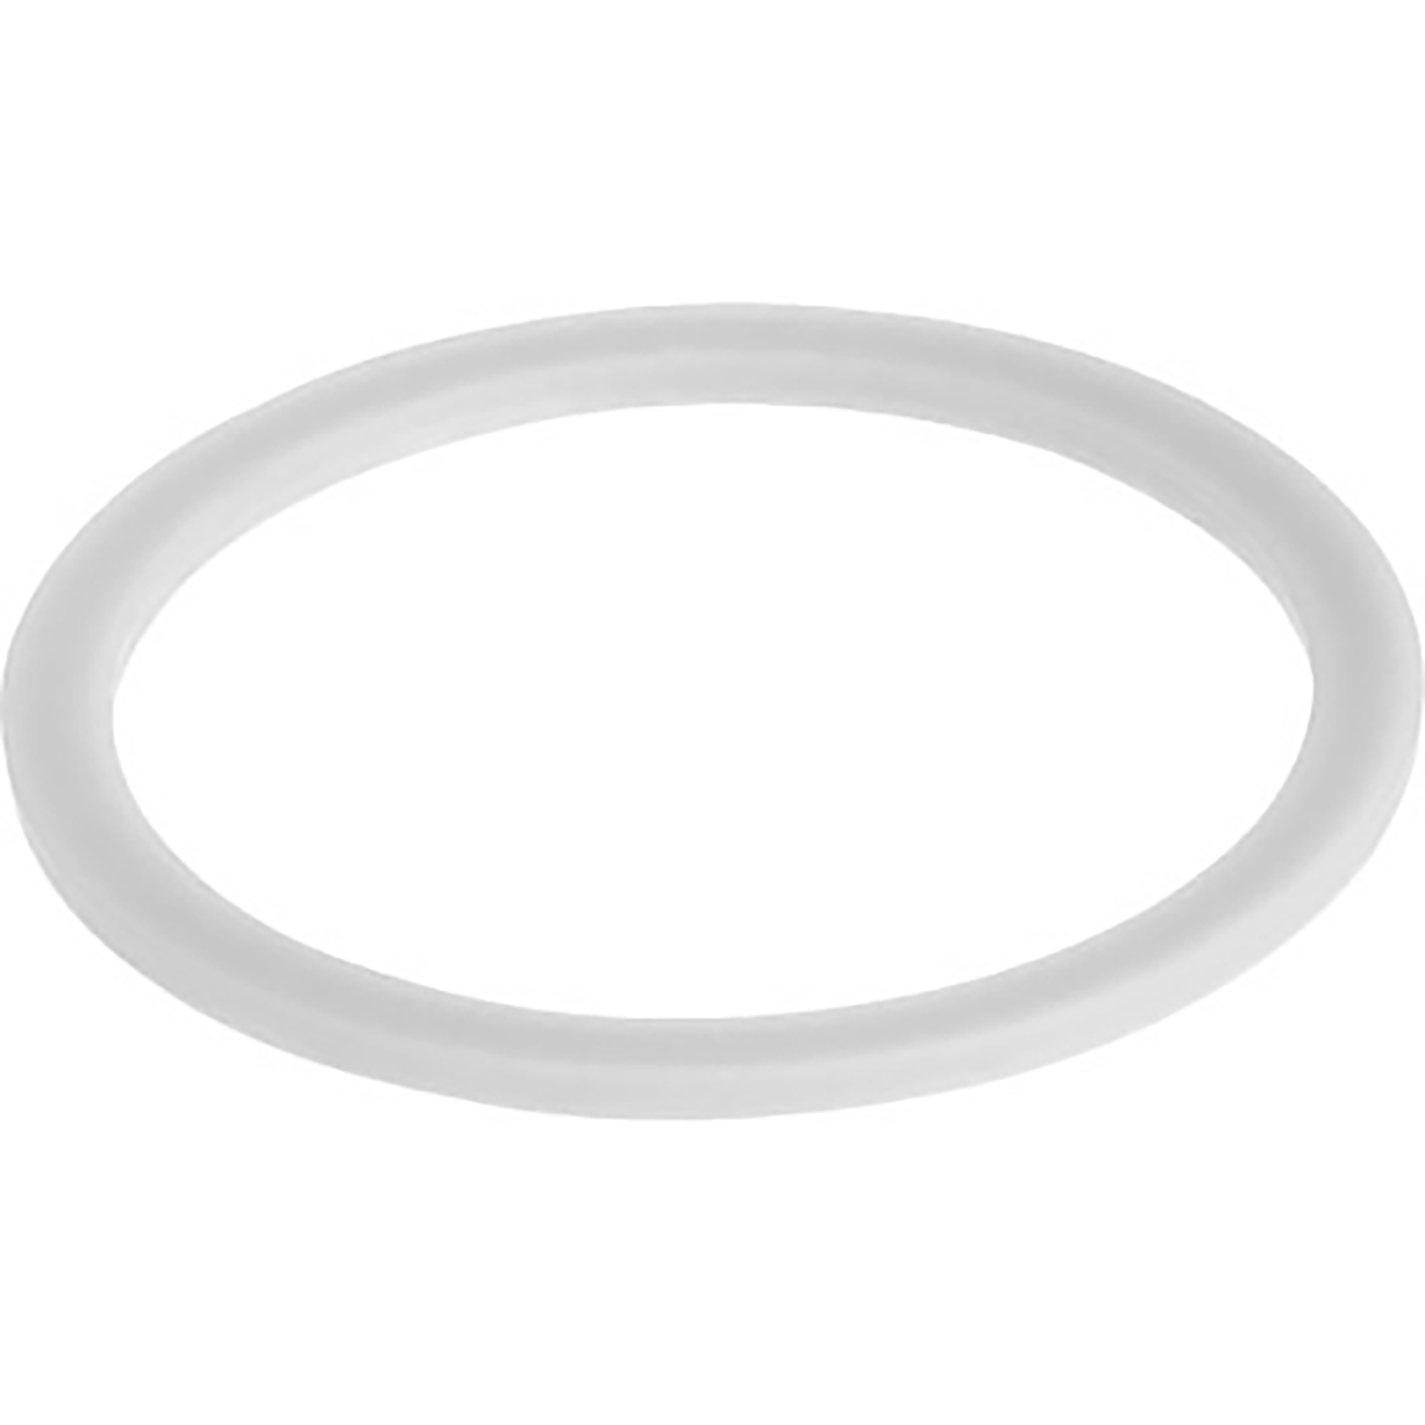 NPAS-C1-R-G14-P-FD-P10 SEALING RING sold in multiples of 10 only